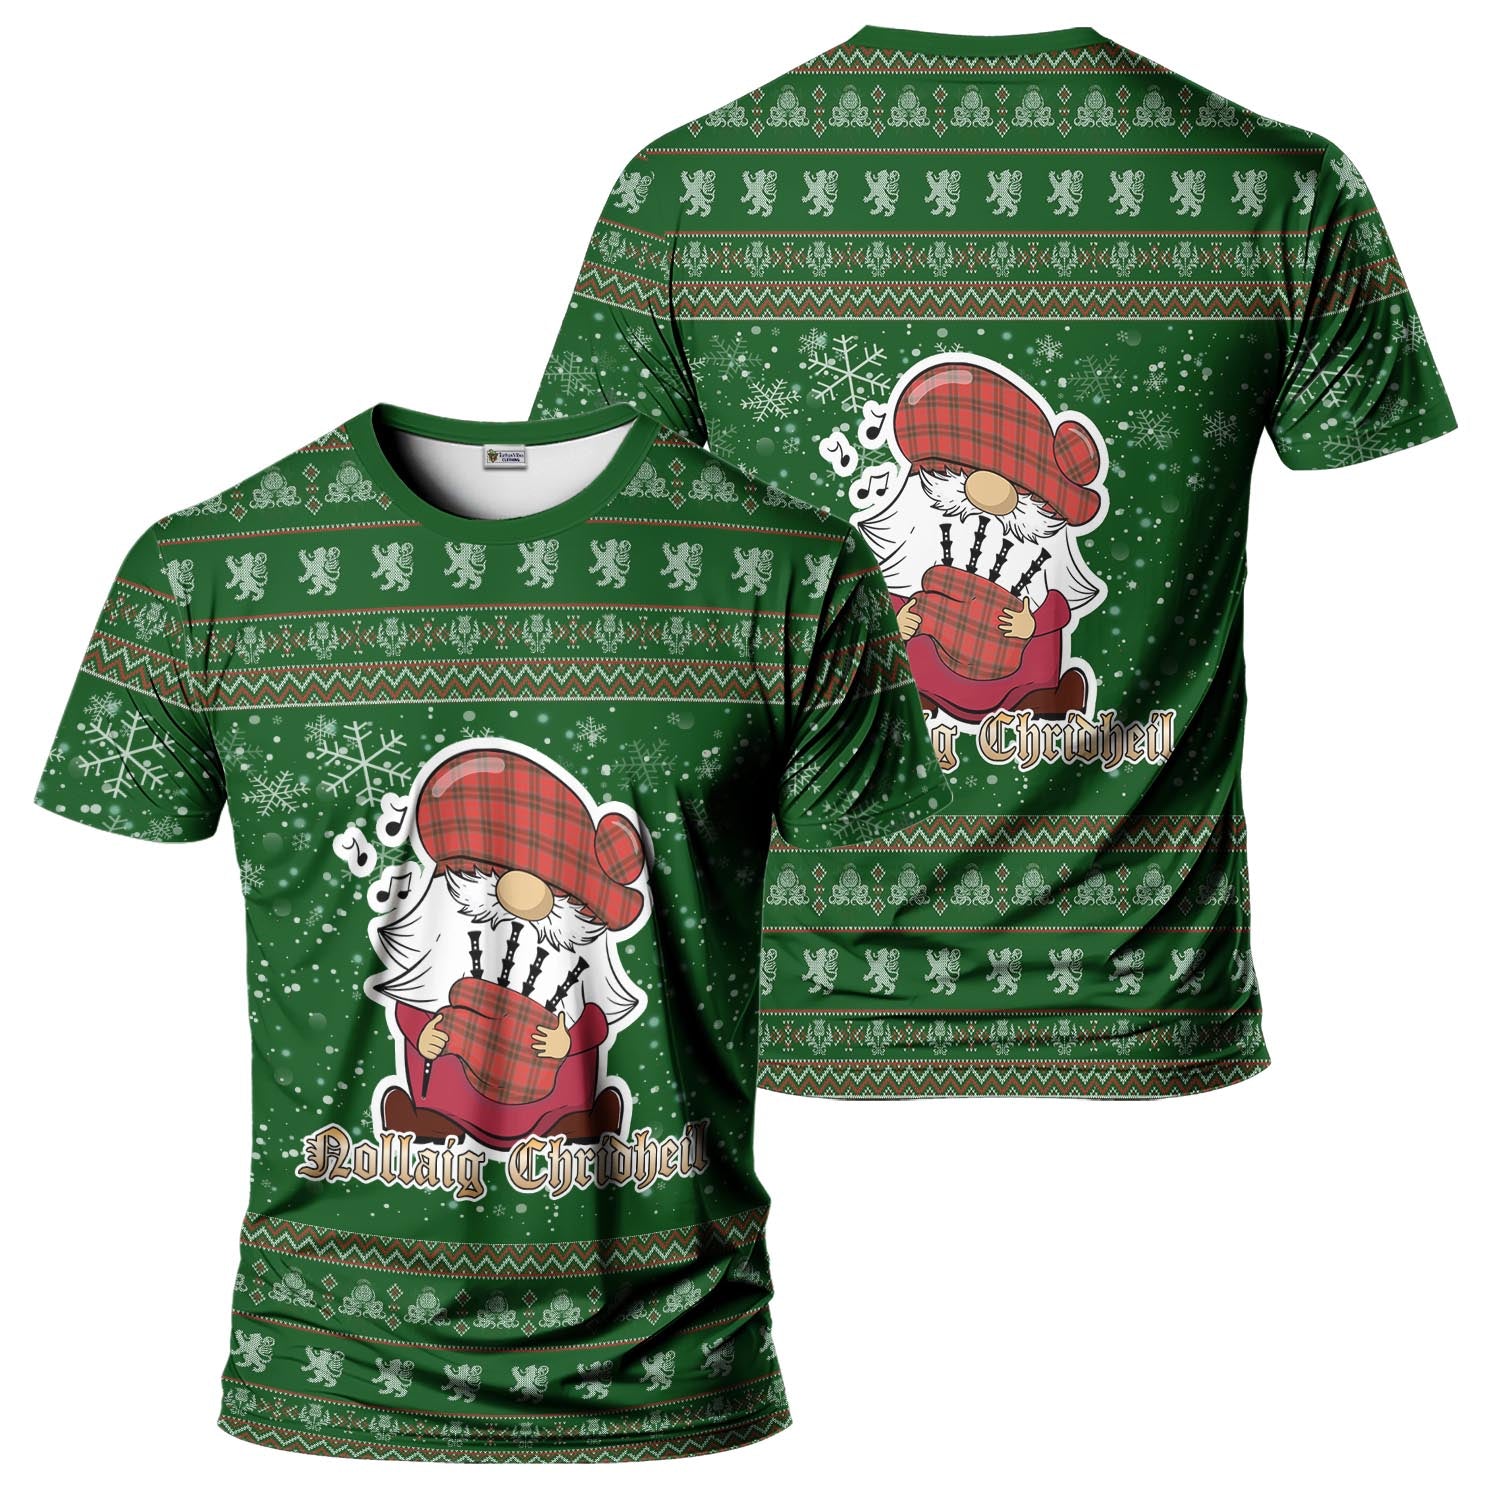 Grant Weathered Clan Christmas Family T-Shirt with Funny Gnome Playing Bagpipes Men's Shirt Green - Tartanvibesclothing